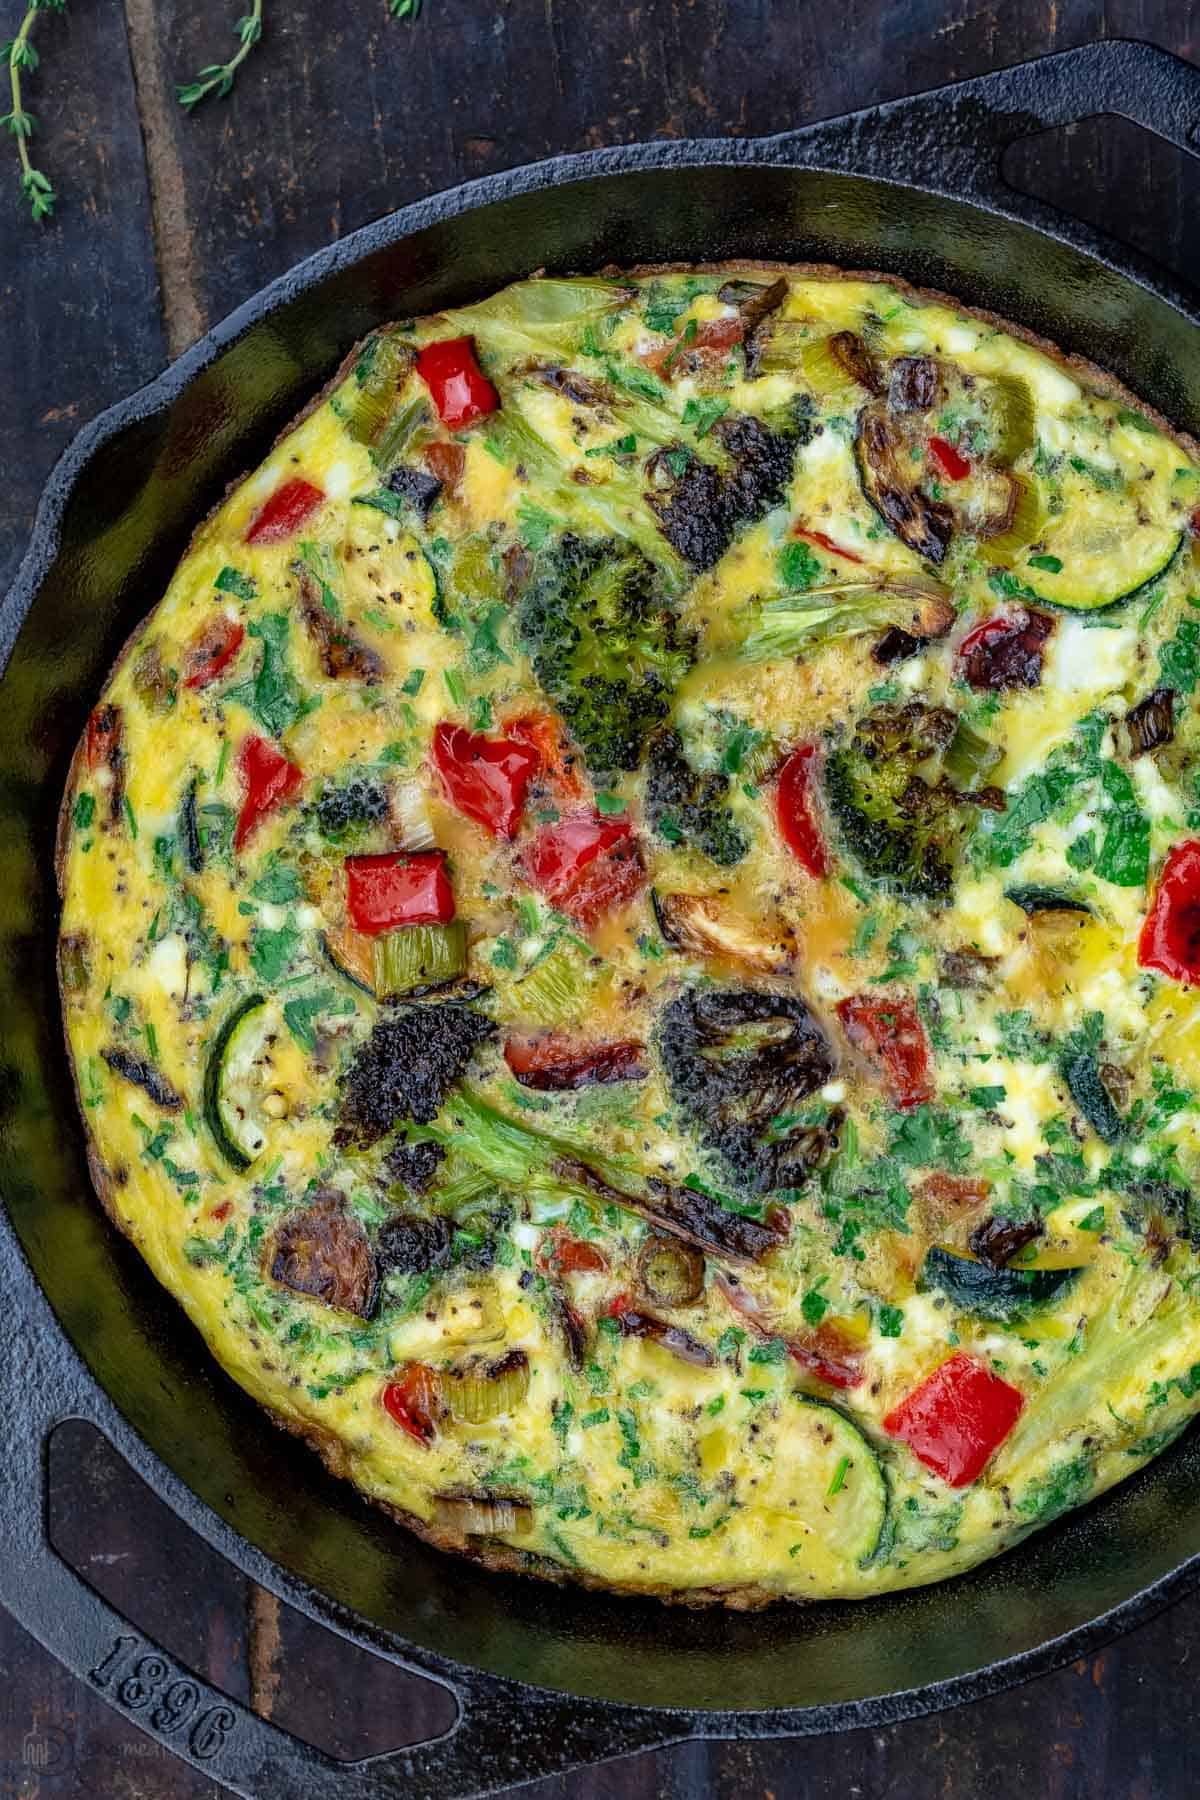 A Vegetable Frittata in a Round, Black Pan on Top of a Wooden Table